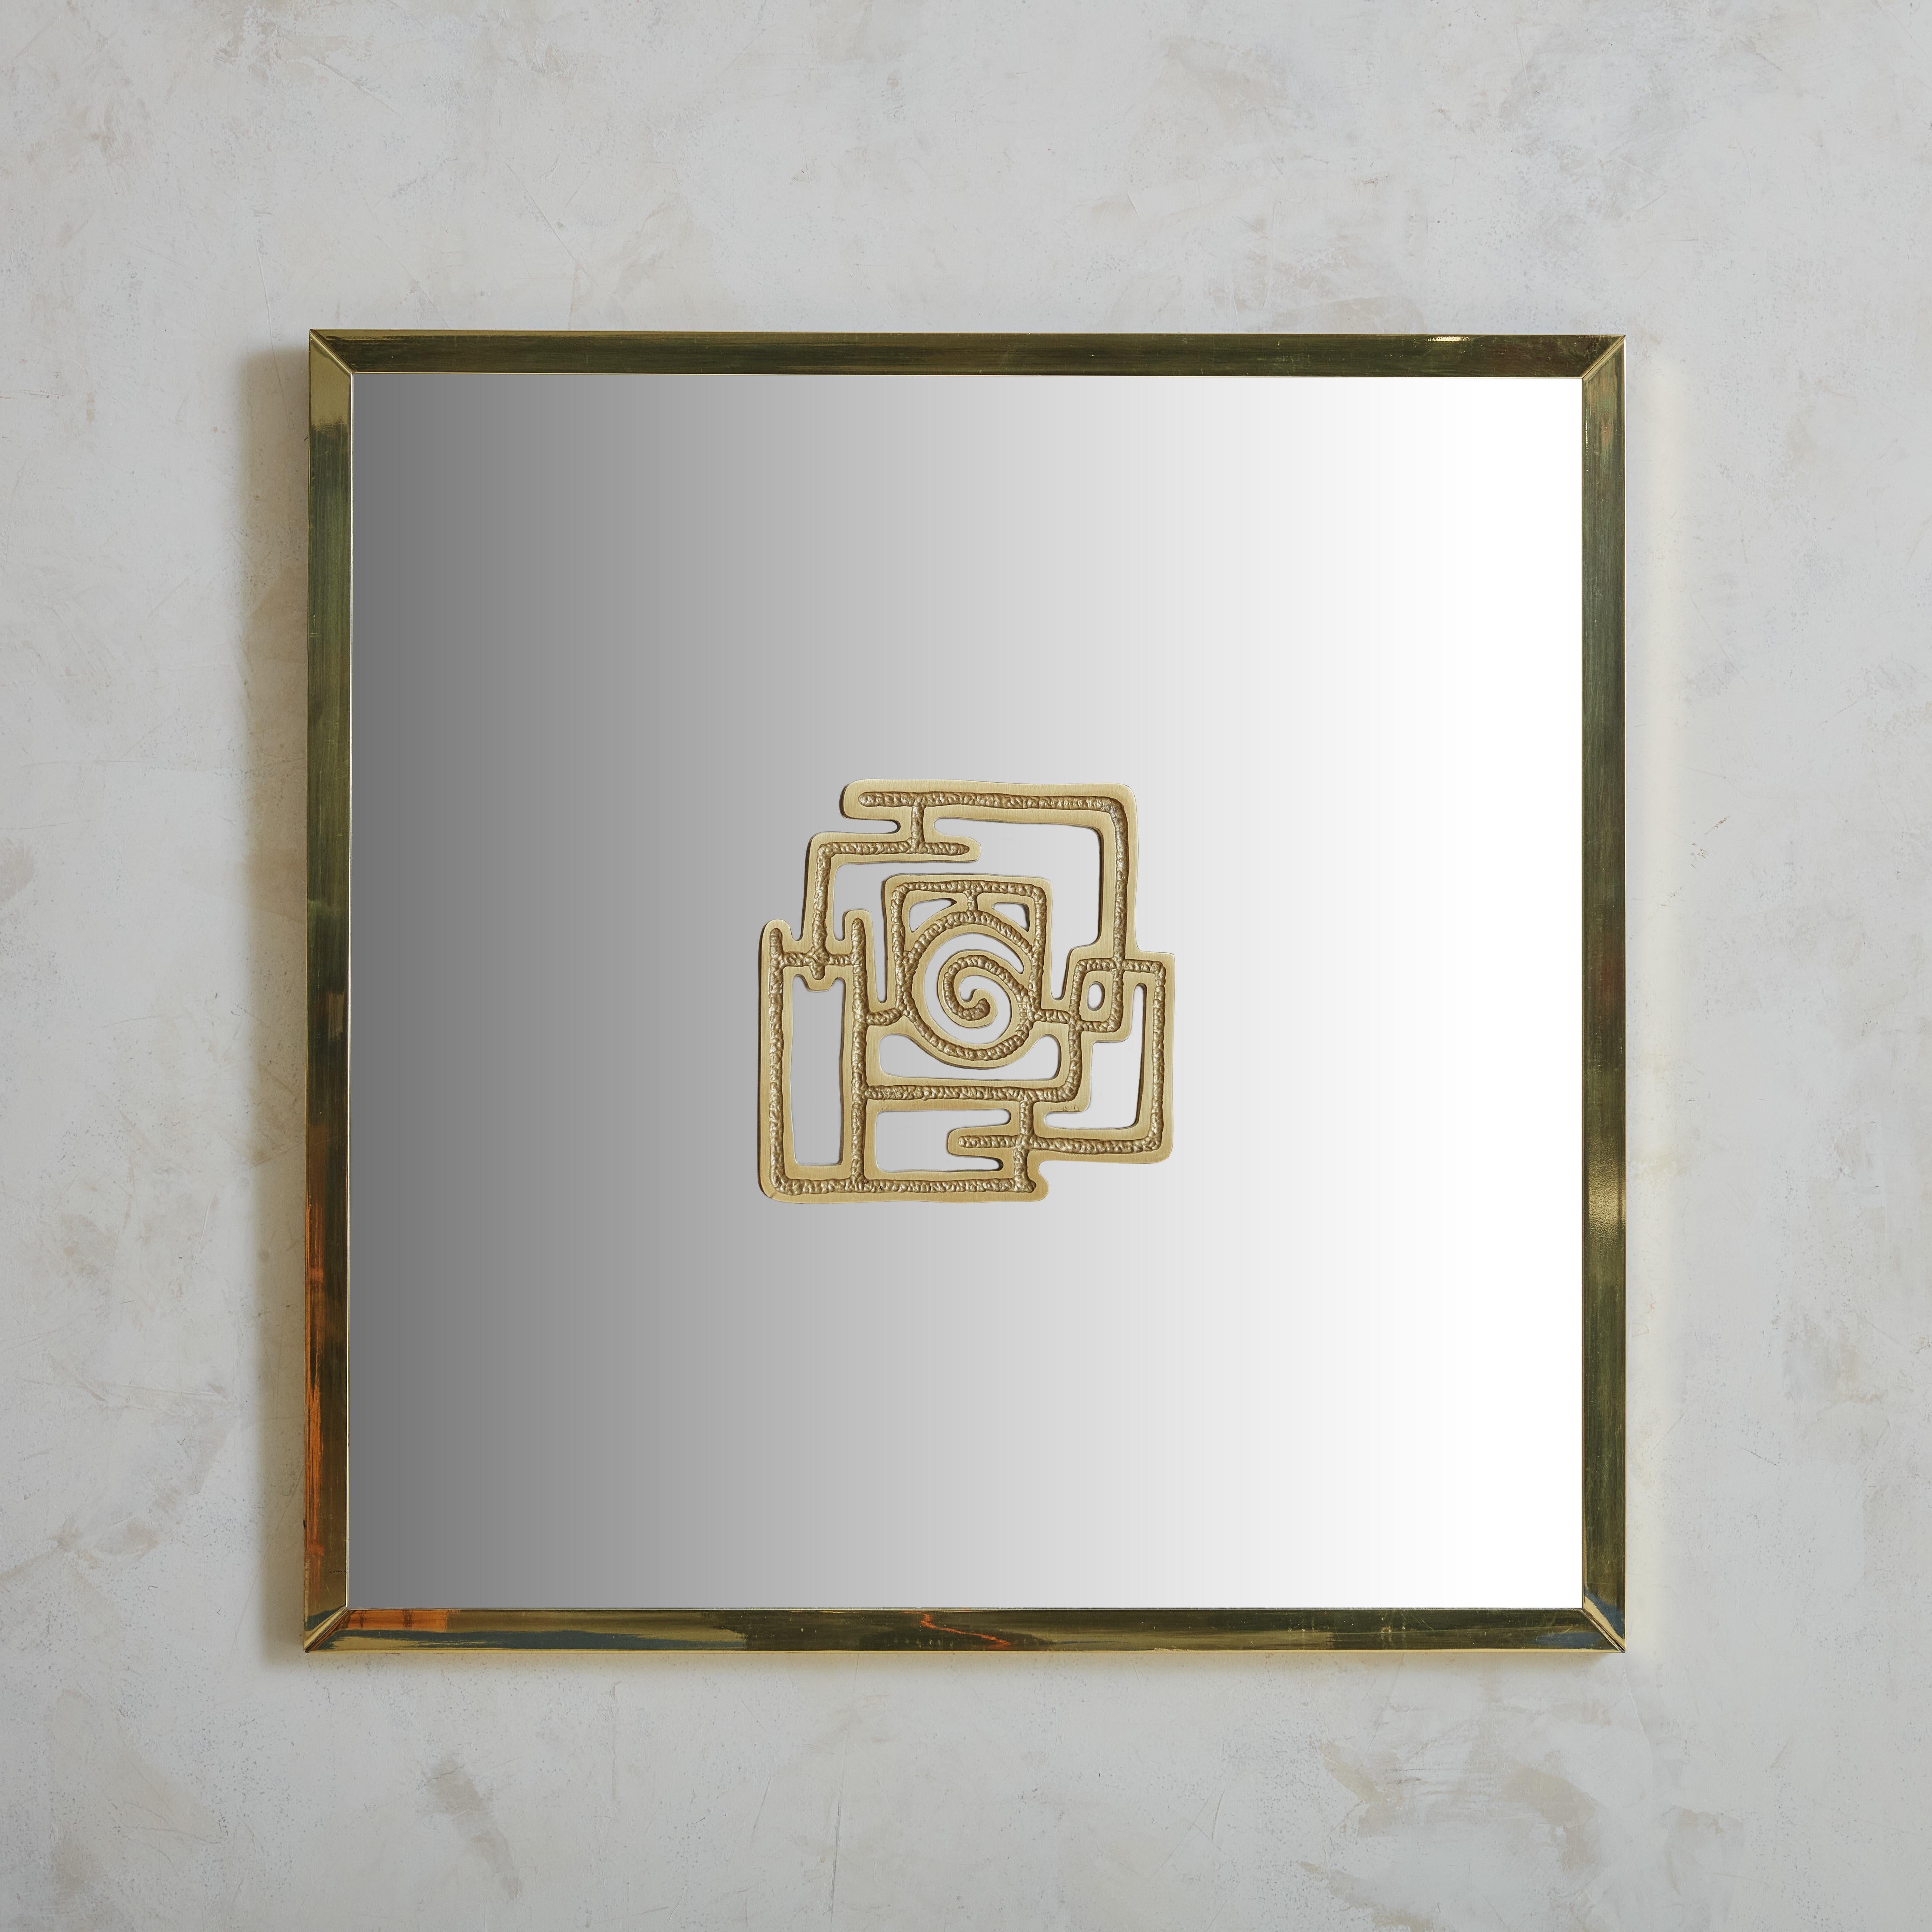 Beautiful bronze framed mirror with hand forged central medallion, attributed to Luciano Frigerio. This stunning piece features a perfect contrapposition between industrial production, in the frame, and Italian craftmanship in the hammered bronze